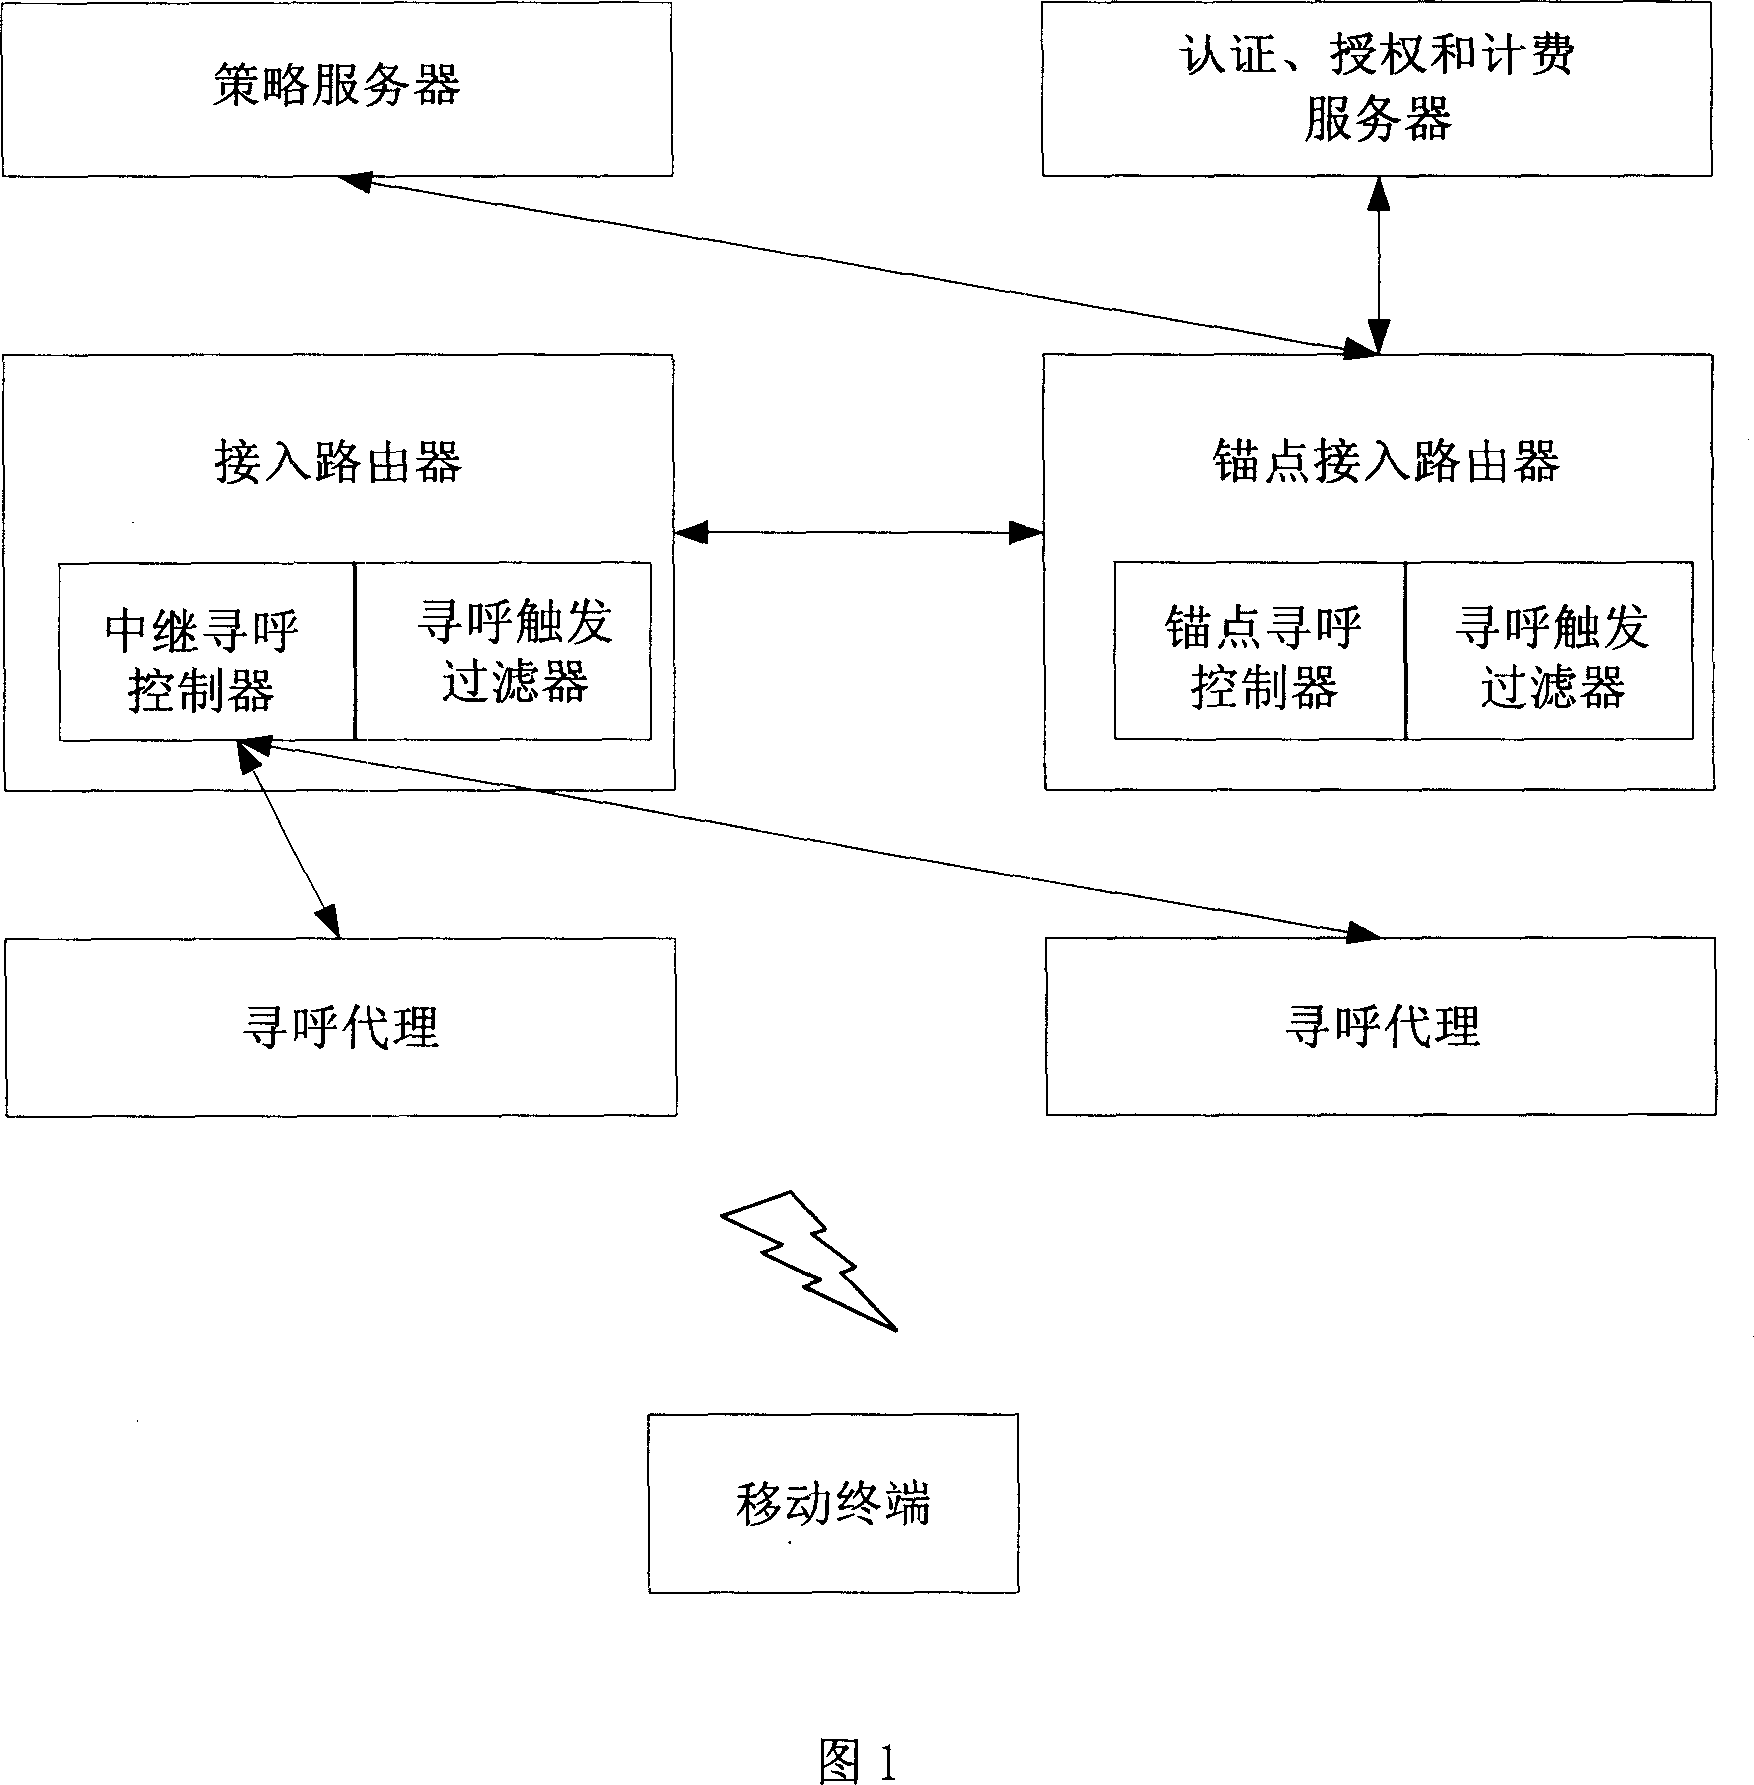 Method and apparatus for saving network wireless resource and mobile terminal cell